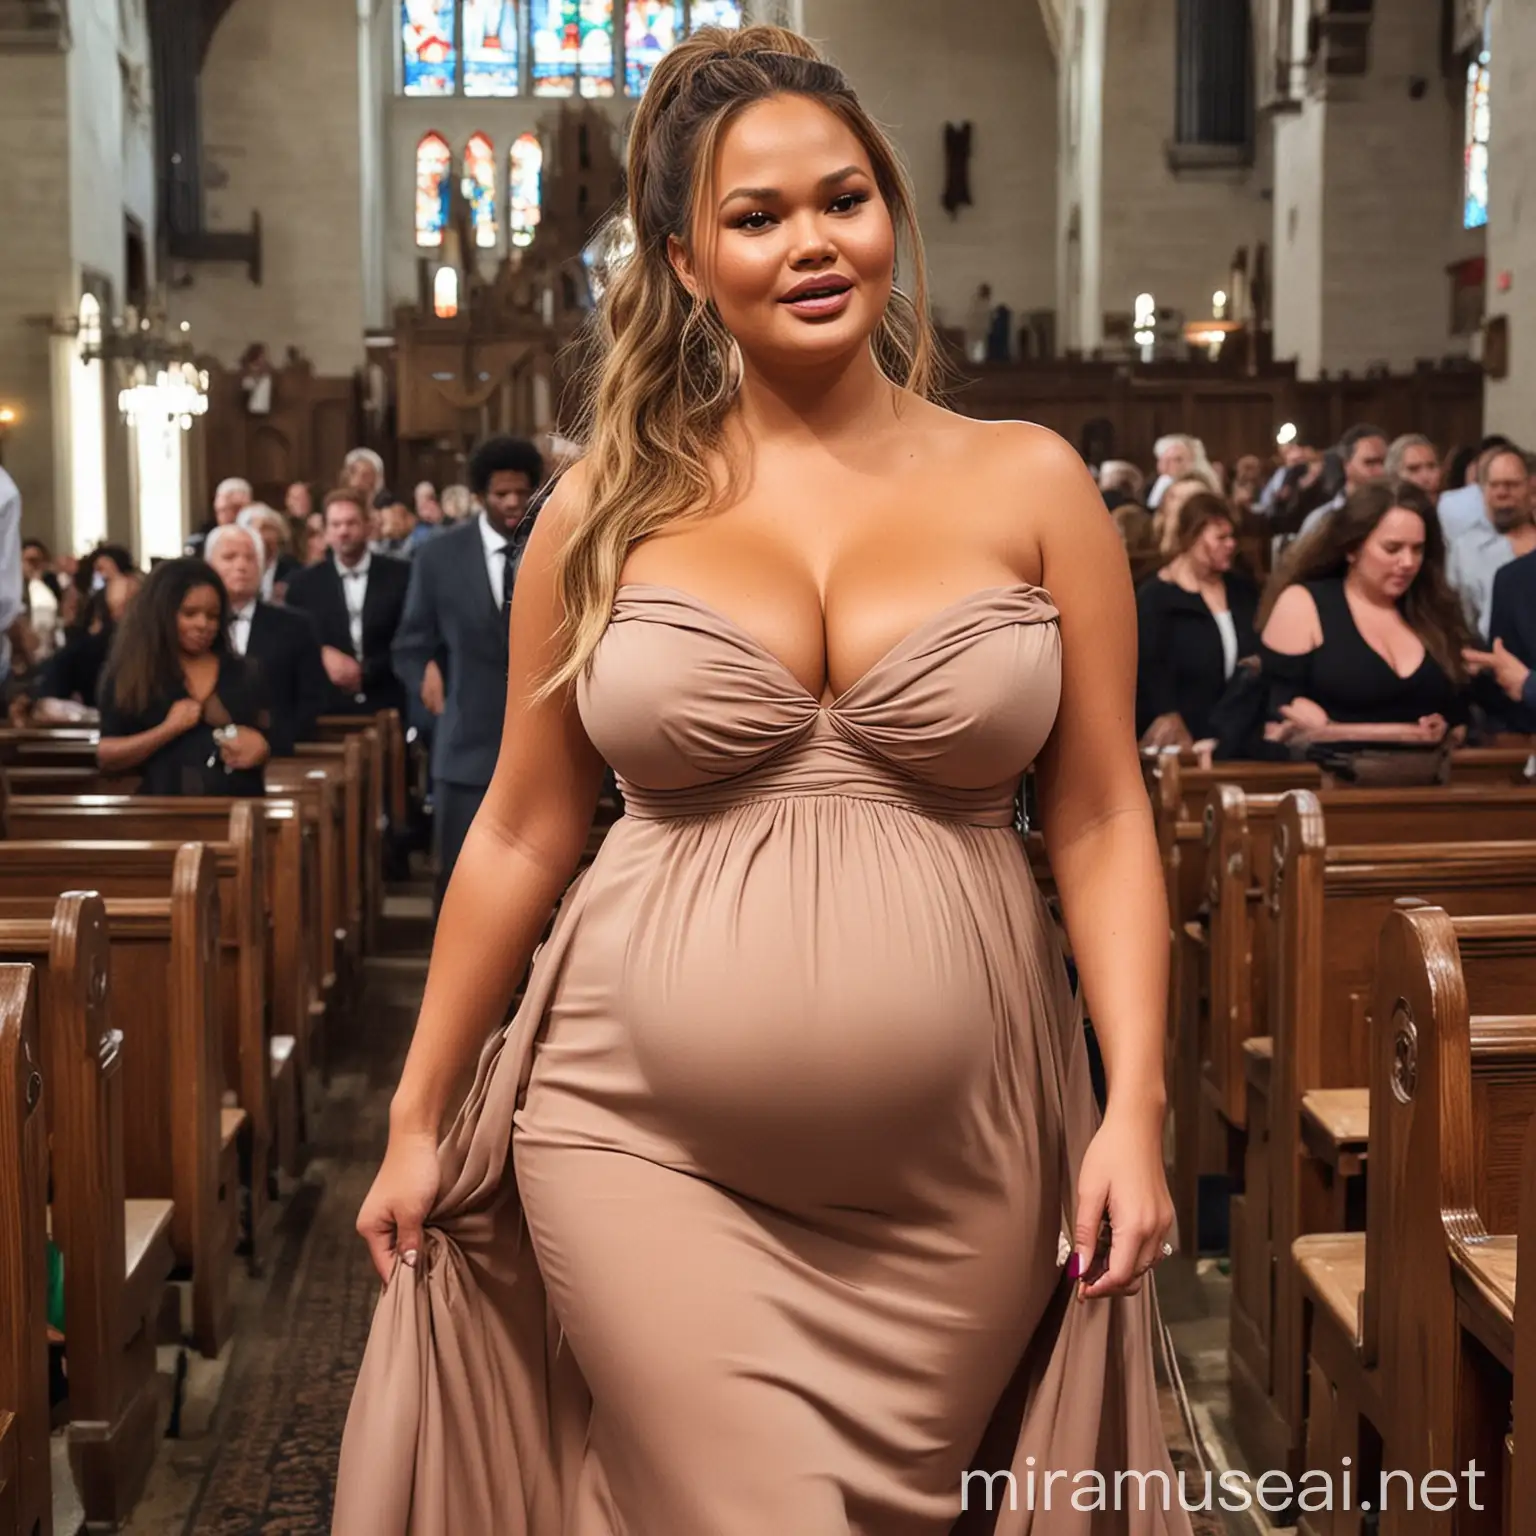 Chrissy Teigen with big pregnant belly in church, bbw, giant breasts, showing massive cleavage, big long kinky hair in a ponytail, wearing strapless dress